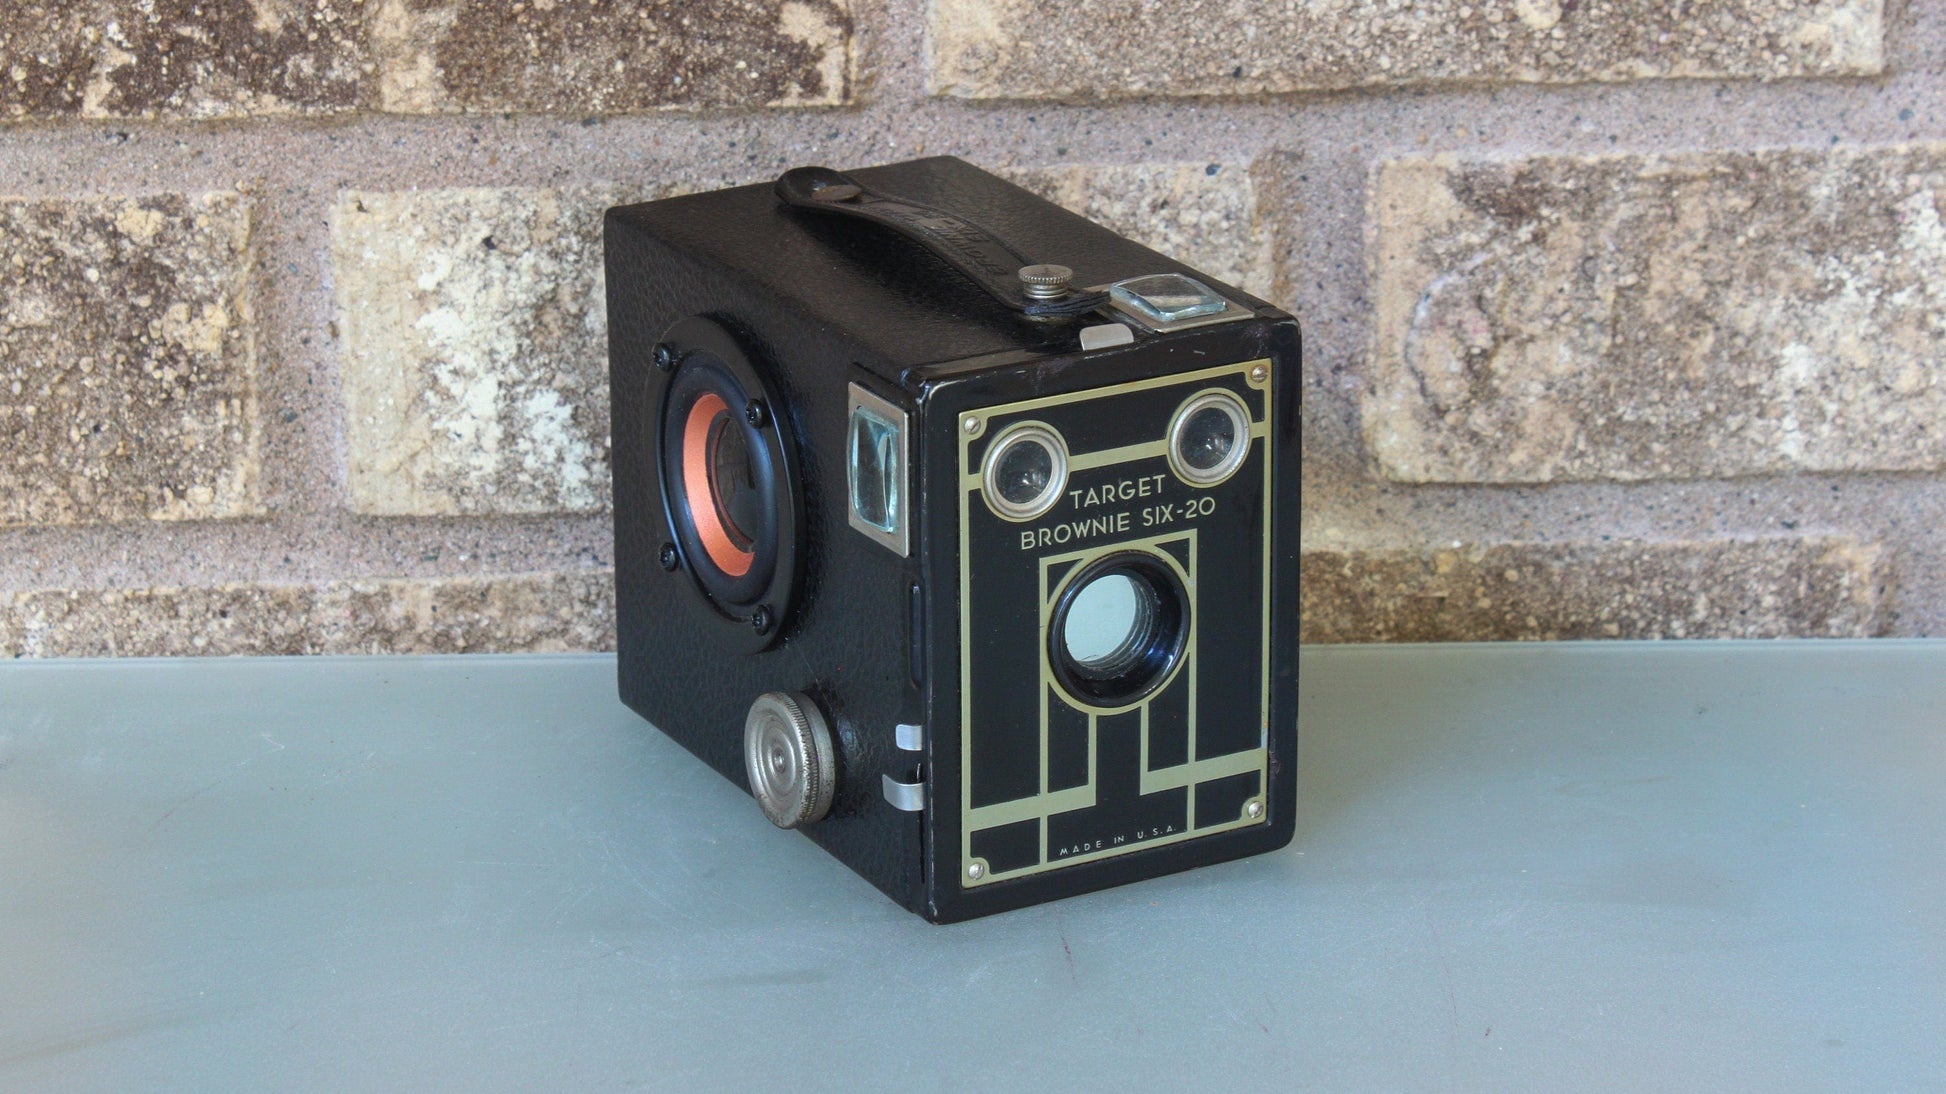 LightAndTimeArt Speakers Wireless Bluetooth Speaker, Vintage Art Deco Kodak Brownie Six-20 Camera, Music Lover Gift, upcycled Electronic Audio gadget for him and her